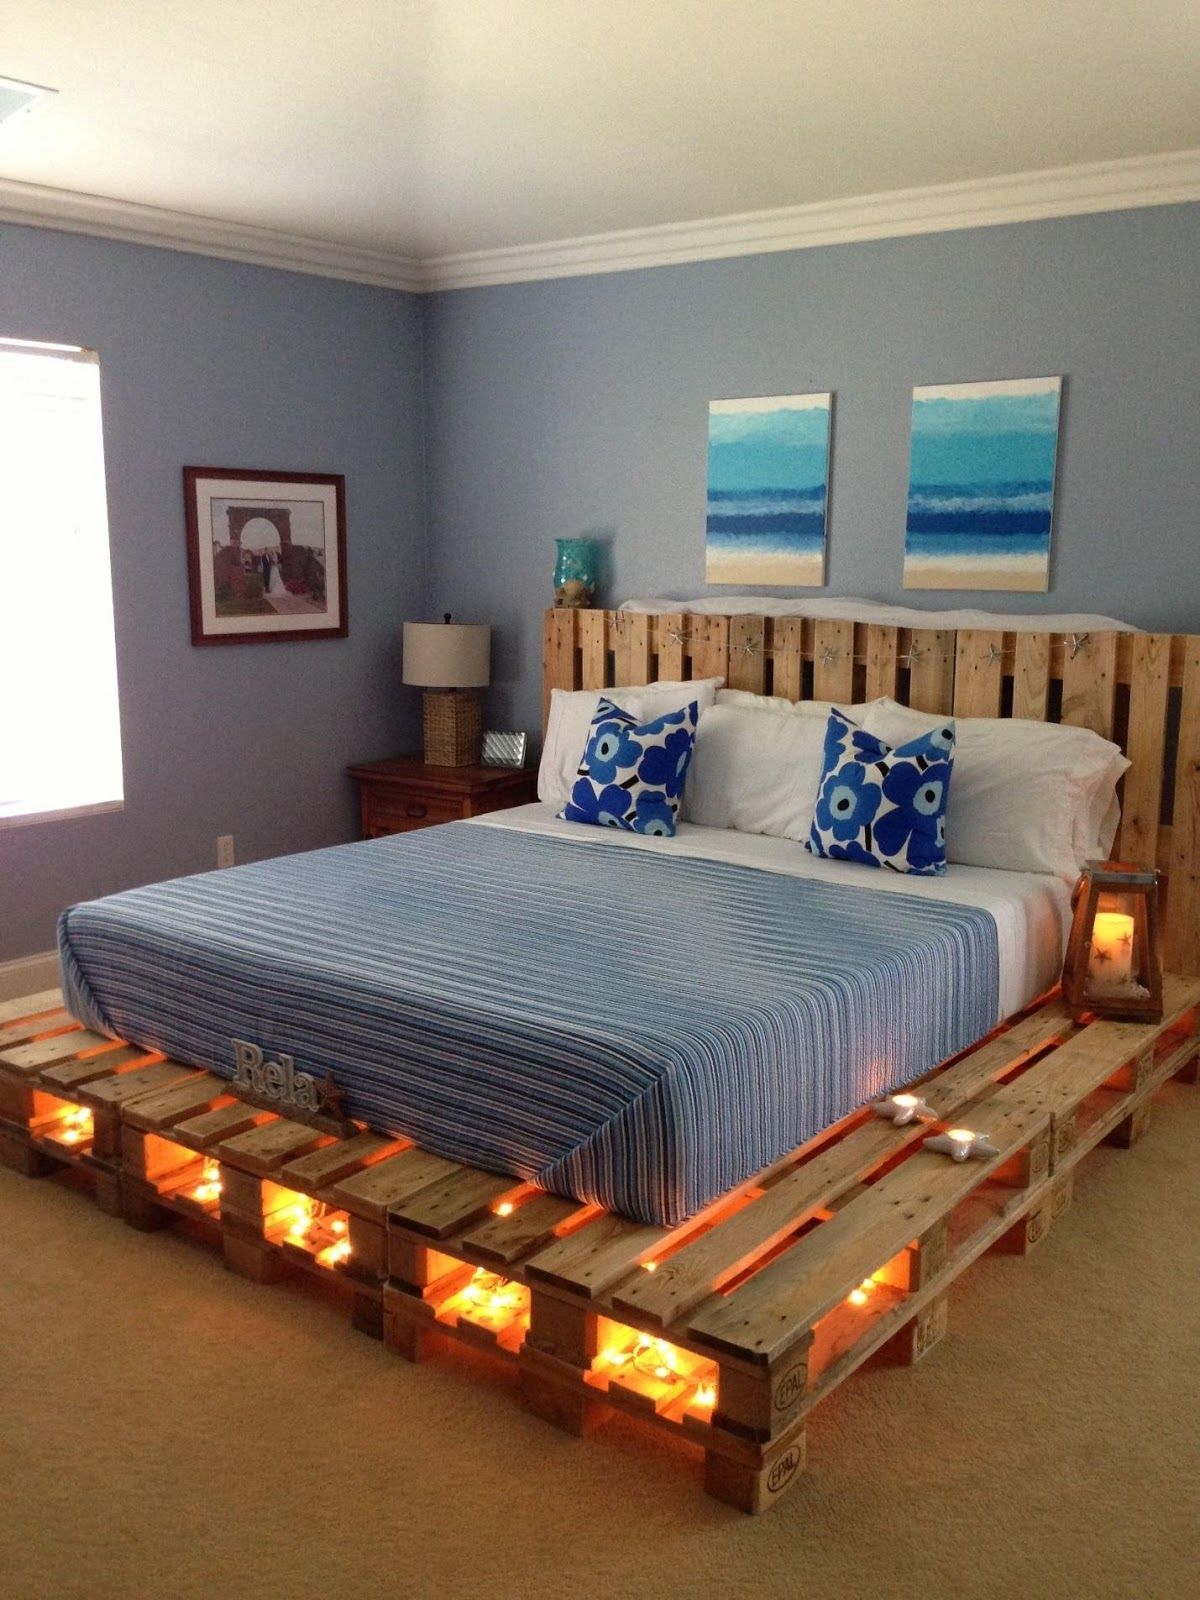 Why buy a bed when you can use pallets to make one? Here are 14 fantastic ideas -   diy Bed Frame decor